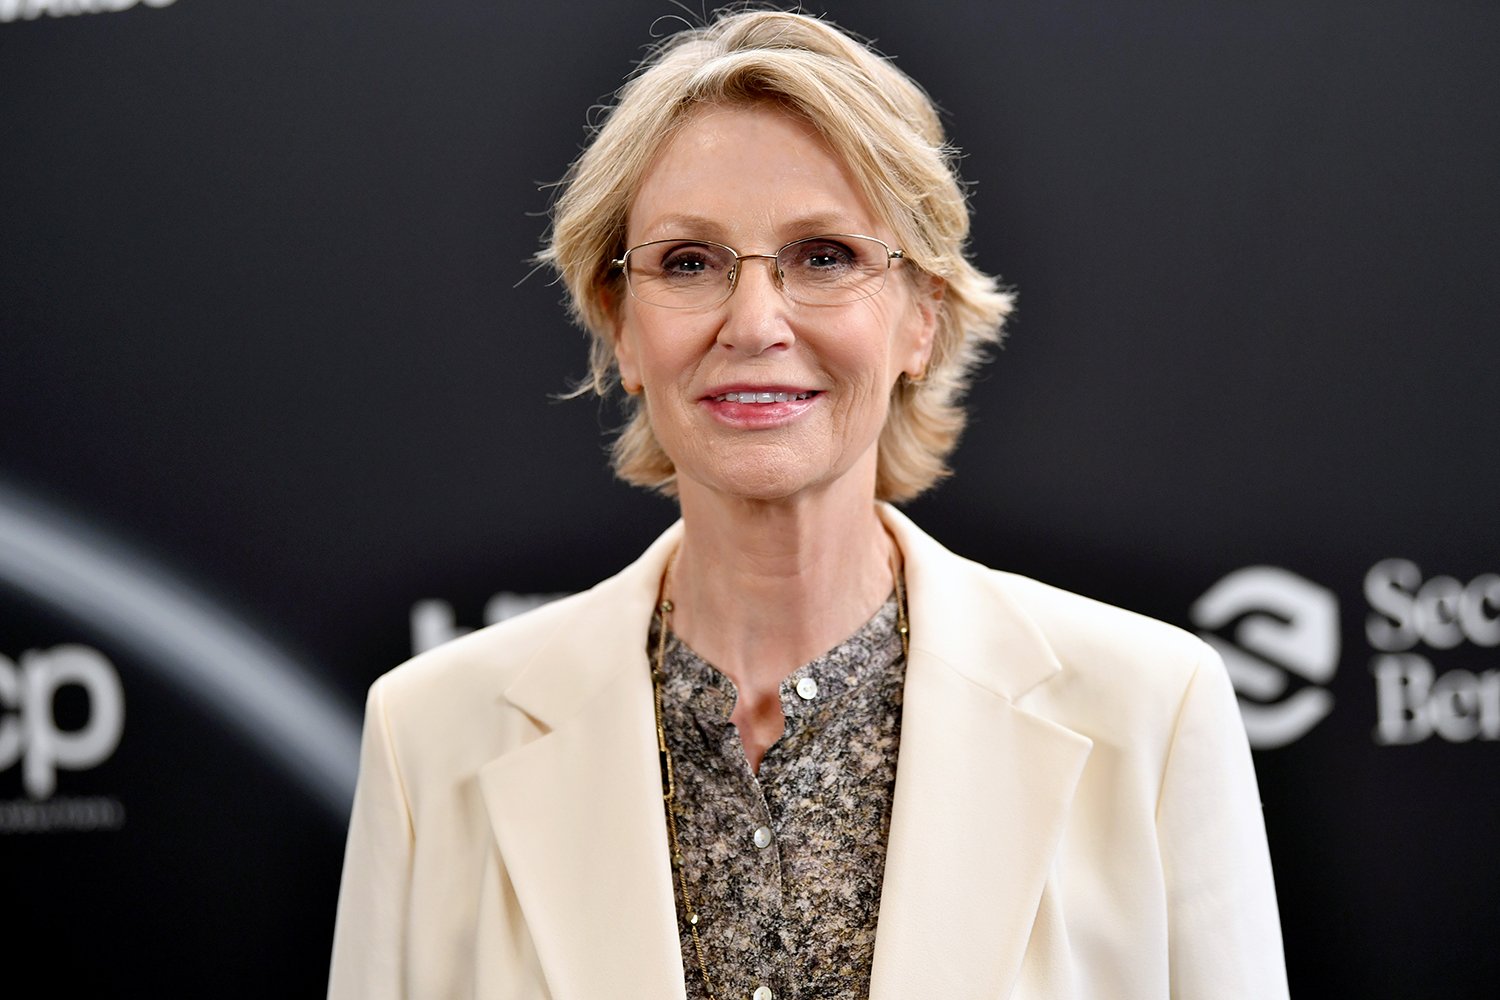 Jane Lynch at the 2020 Billboard Music Awards. Jame Lynch was once a guest star on Gilmore Girls.